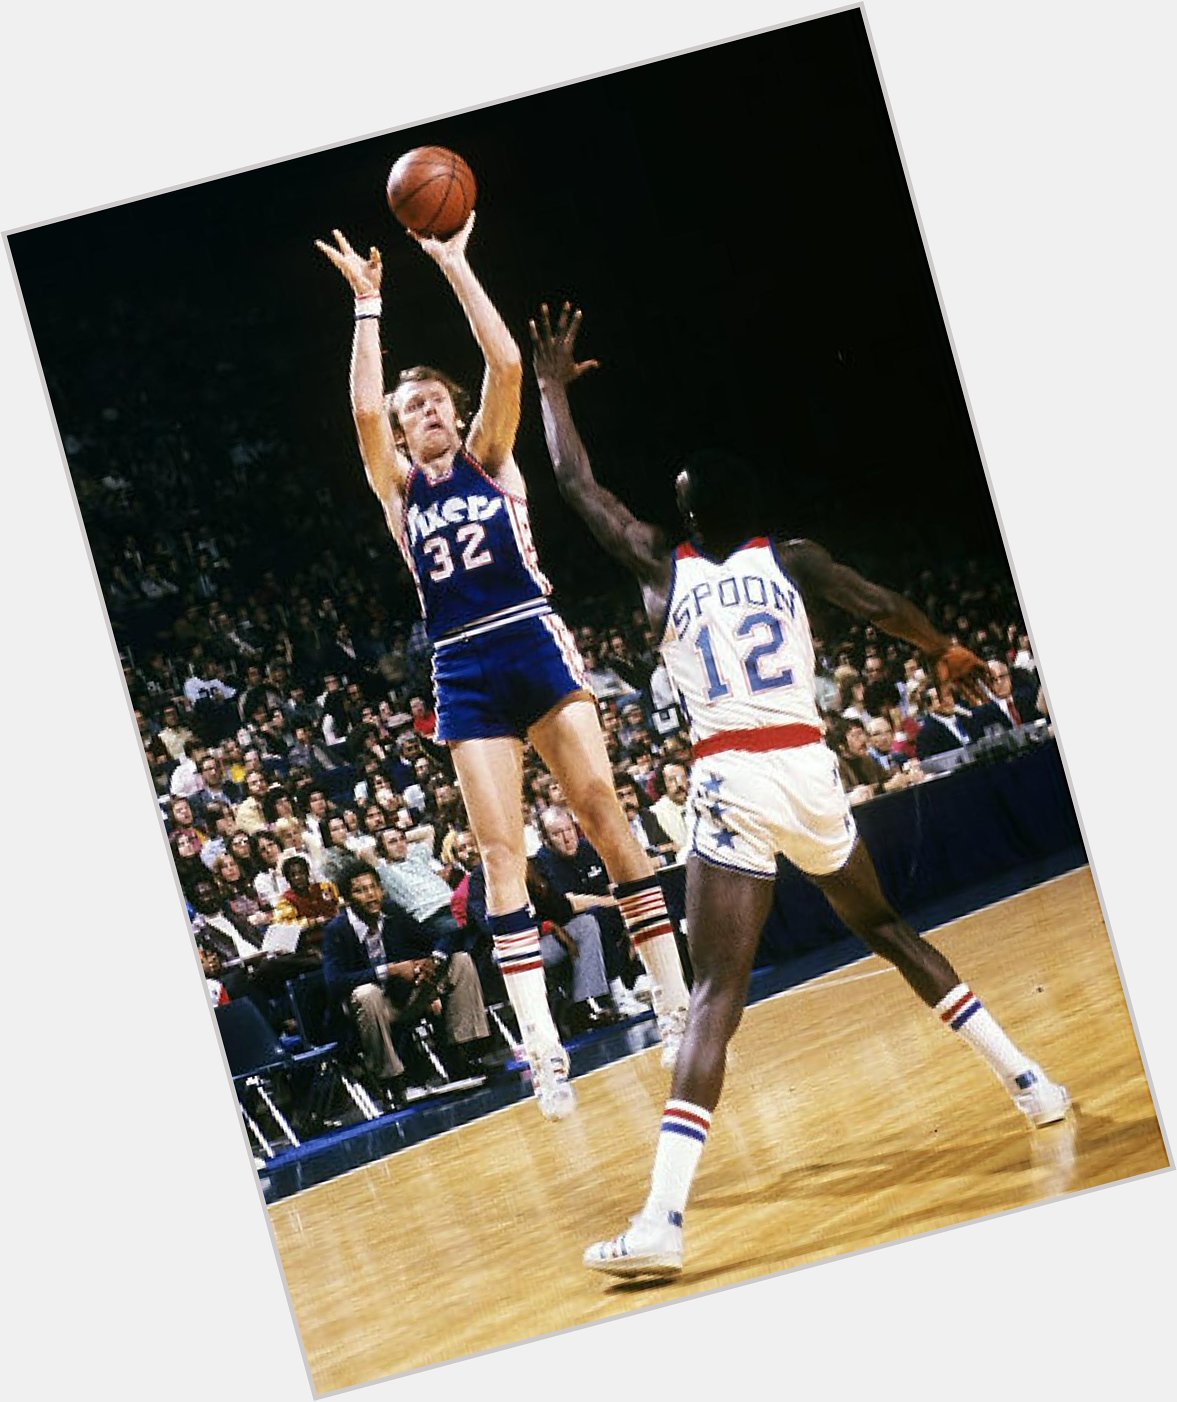 Happy 74th birthday to Billy C, Billy Cunningham, former 76er player and coach 